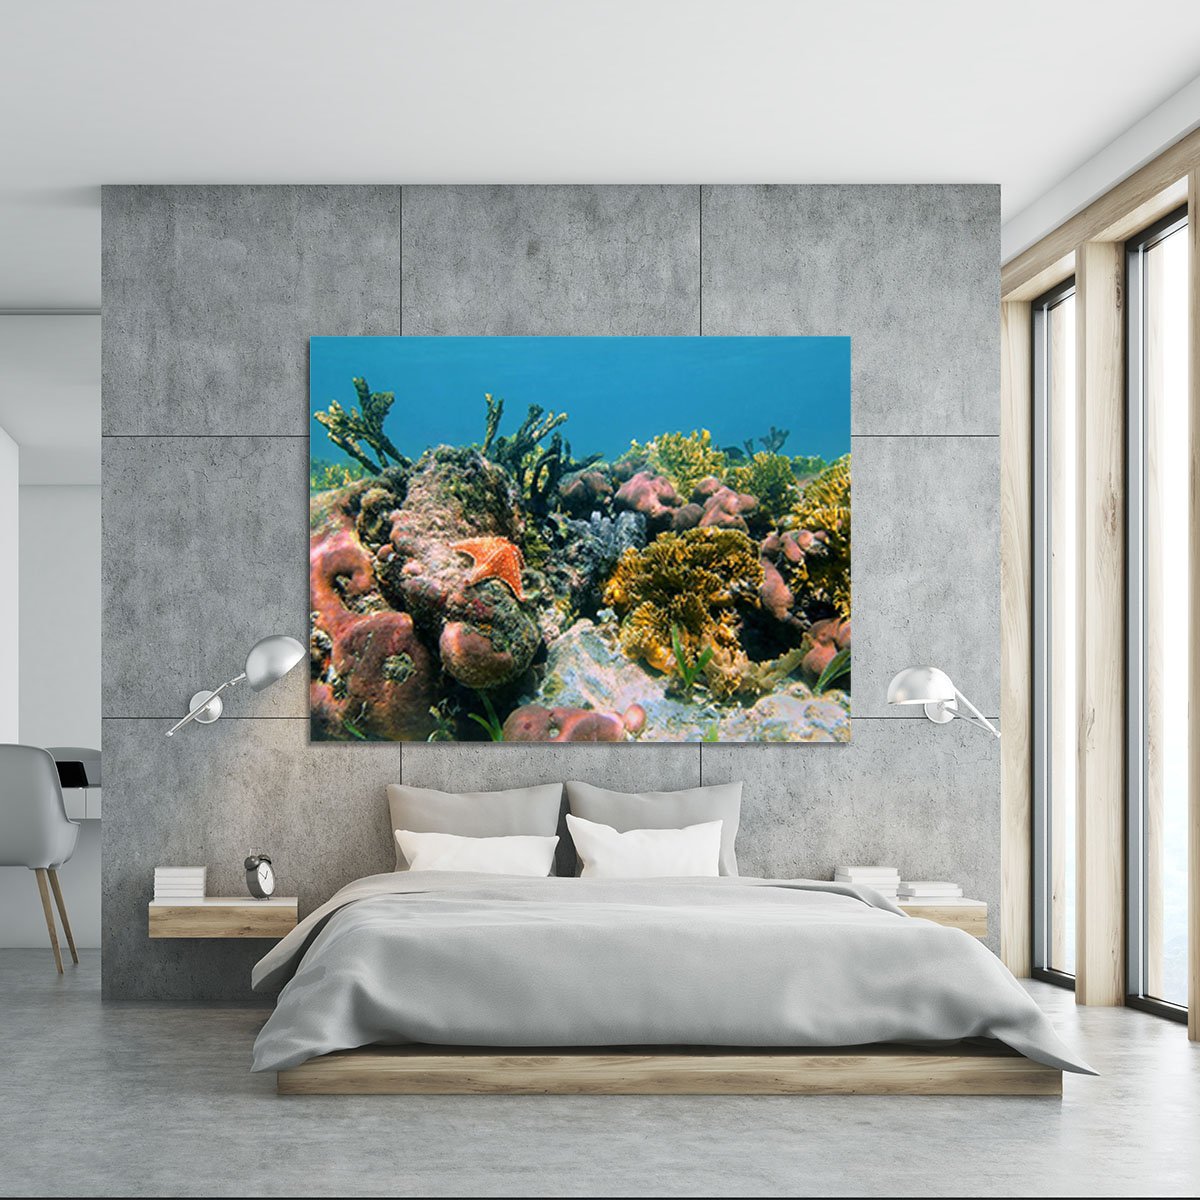 Underwater reef in the Caribbean sea with corals sponges and a starfish Canvas Print or Poster